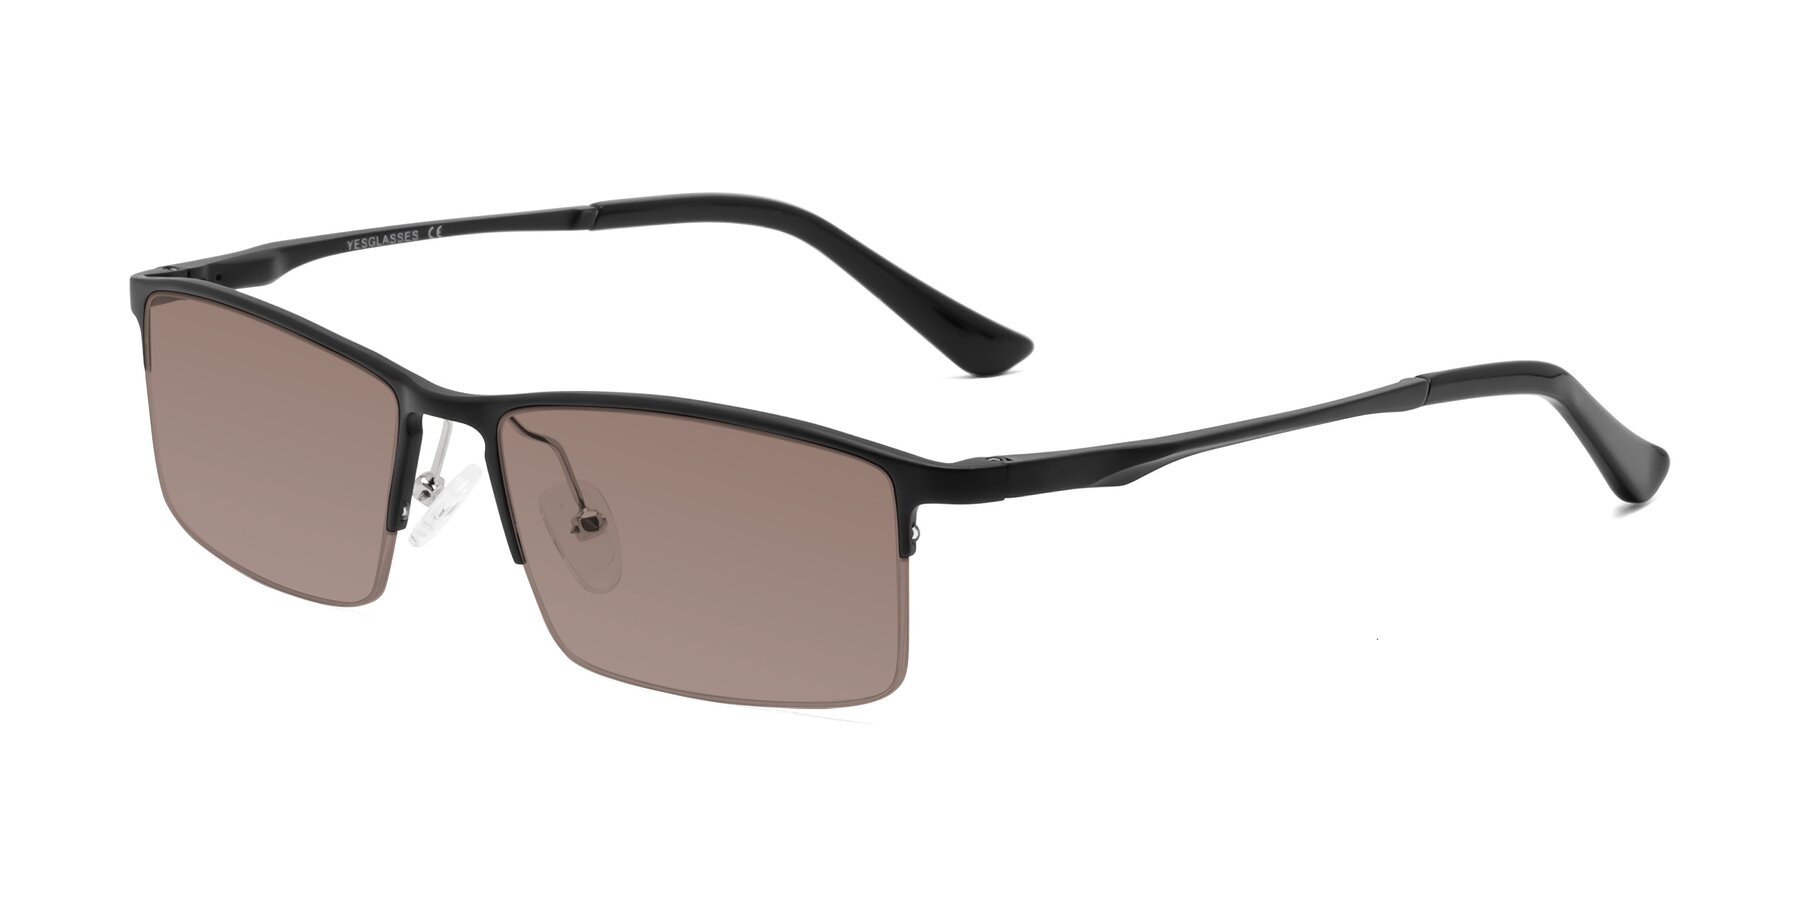 Angle of CX6263 in Black with Medium Brown Tinted Lenses